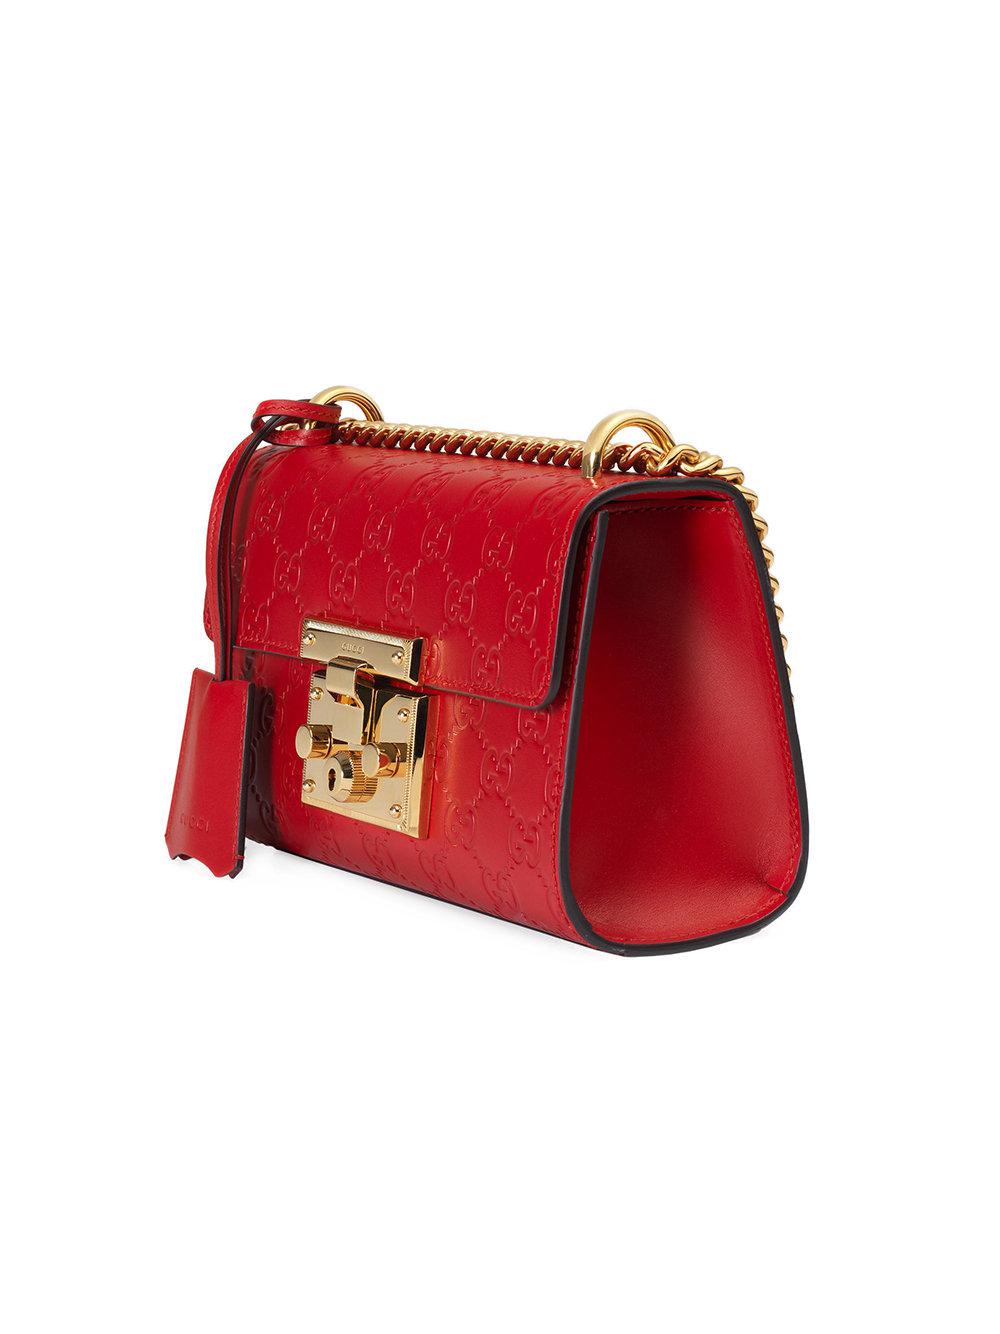 Gucci Small Padlock Signature Leather Shoulder Bag in Red | Lyst